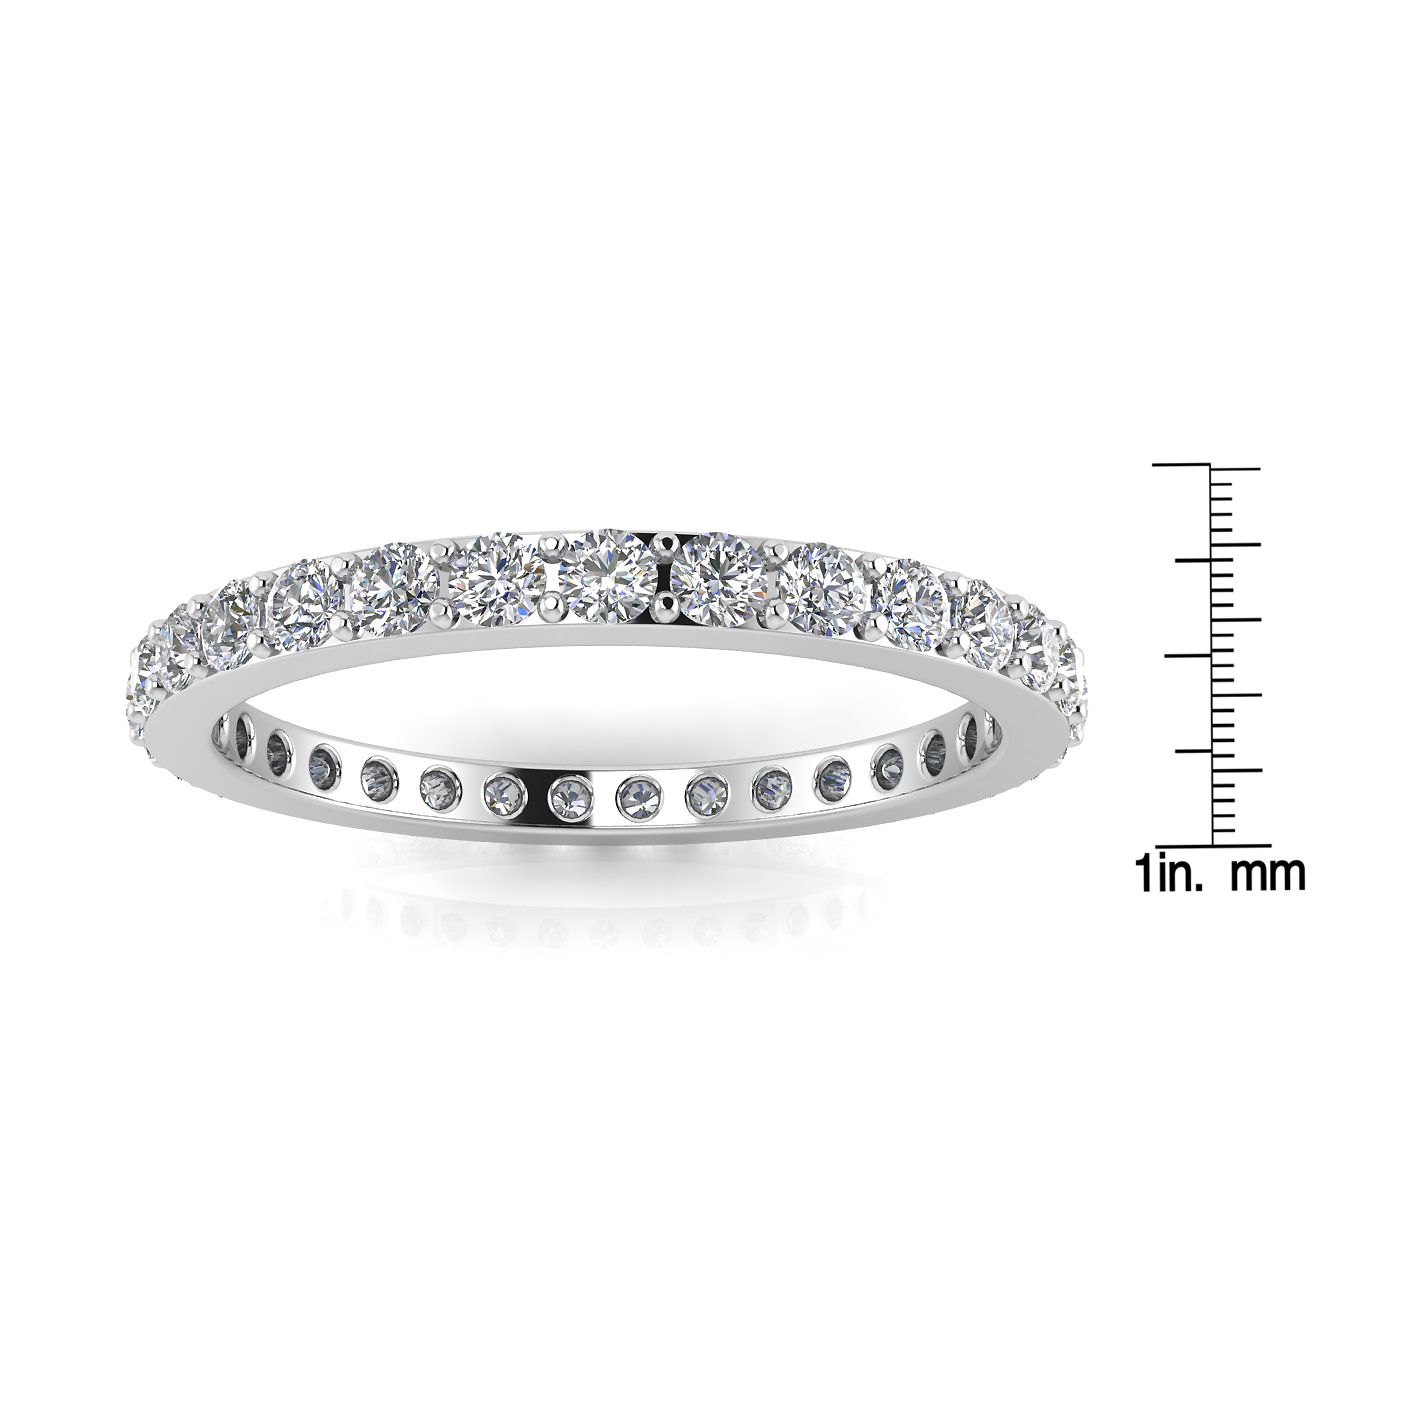 Round Brilliant Cut Diamond Pave Set Eternity Ring In 18k White Gold  (0.48ct. Tw.) Ring Size 7